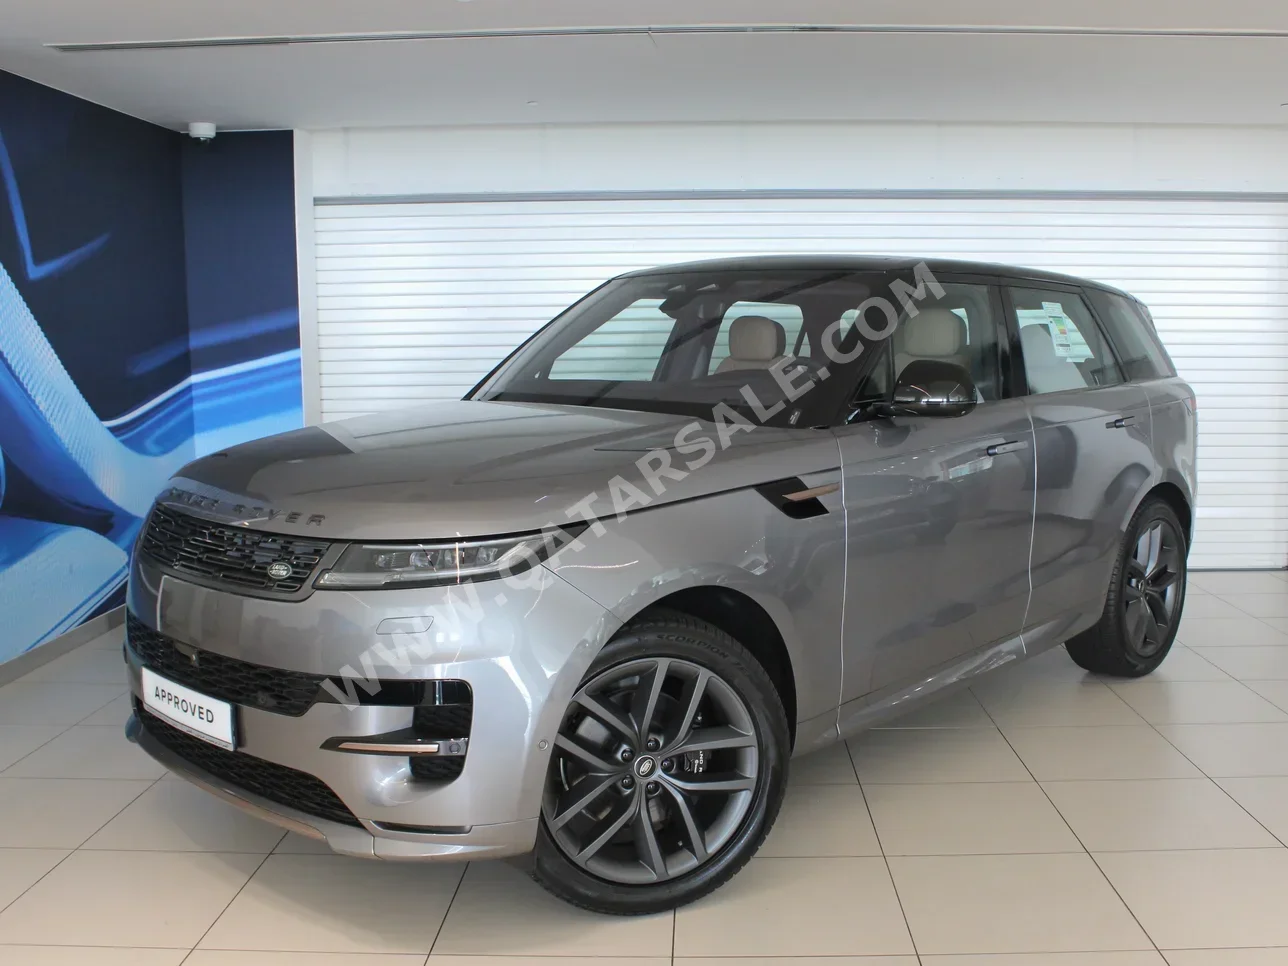 Land Rover  Range Rover  Sport HSE Dynamic  2023  Automatic  45 Km  6 Cylinder  All Wheel Drive (AWD)  SUV  Gray  With Warranty